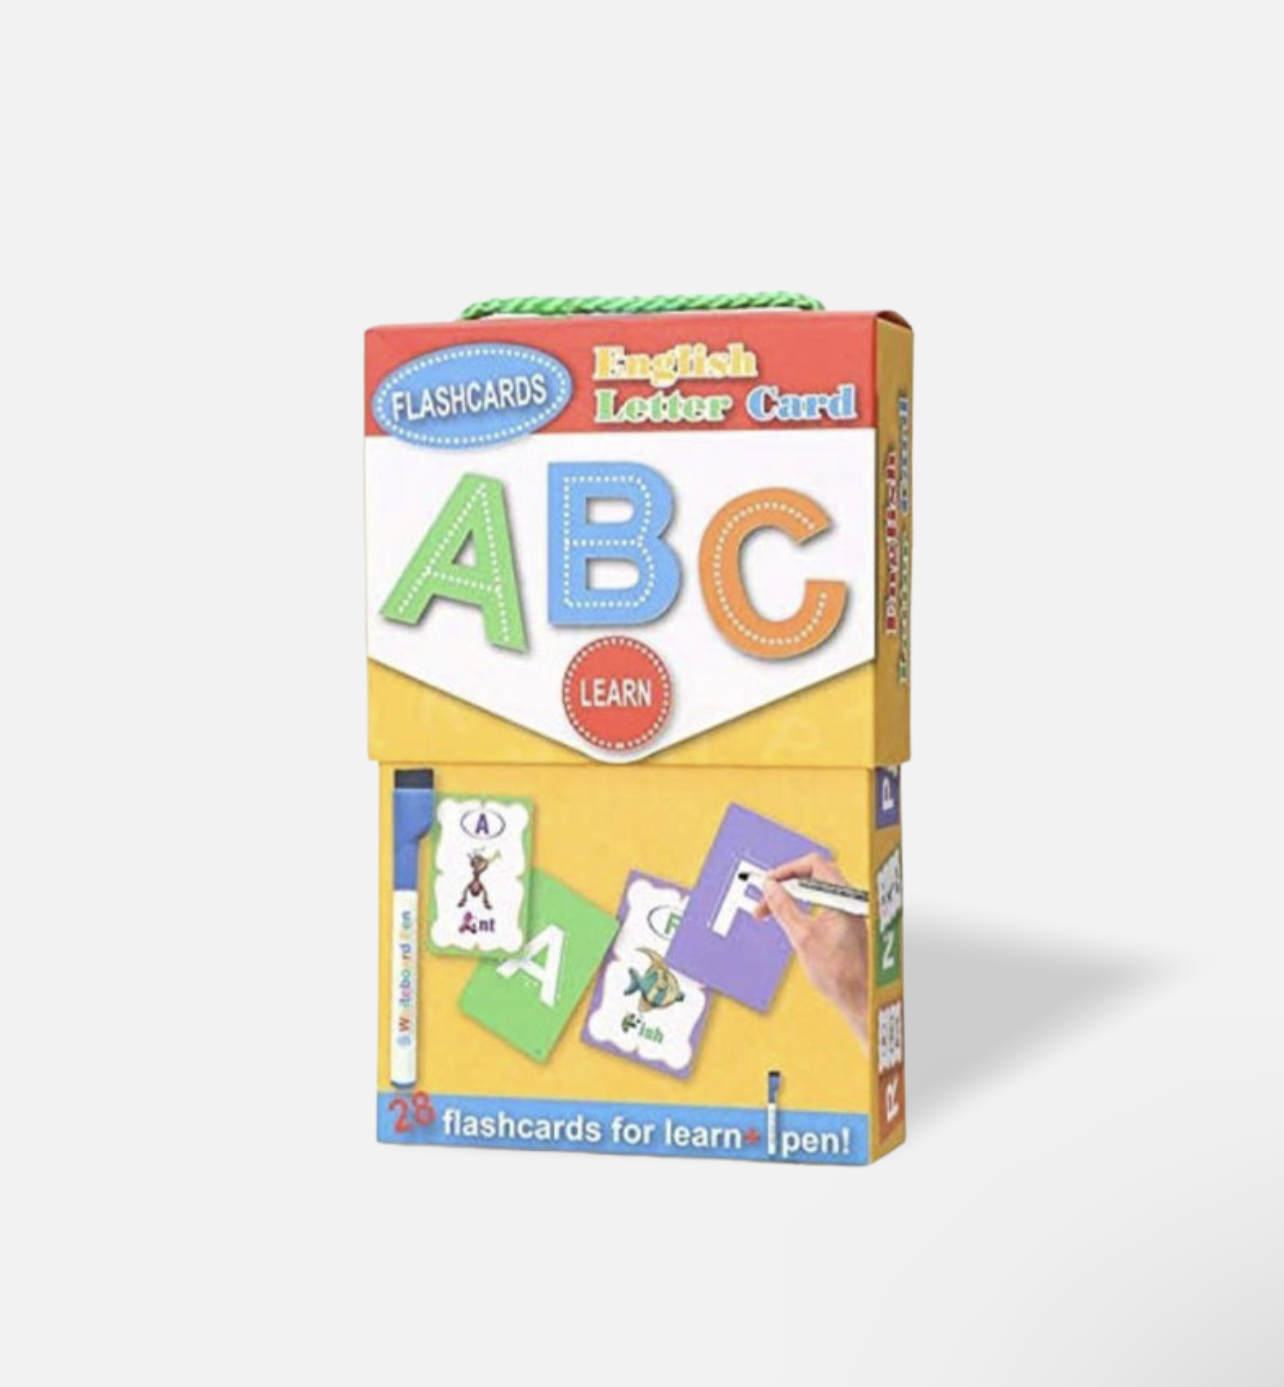 Flashcards to learn English letters